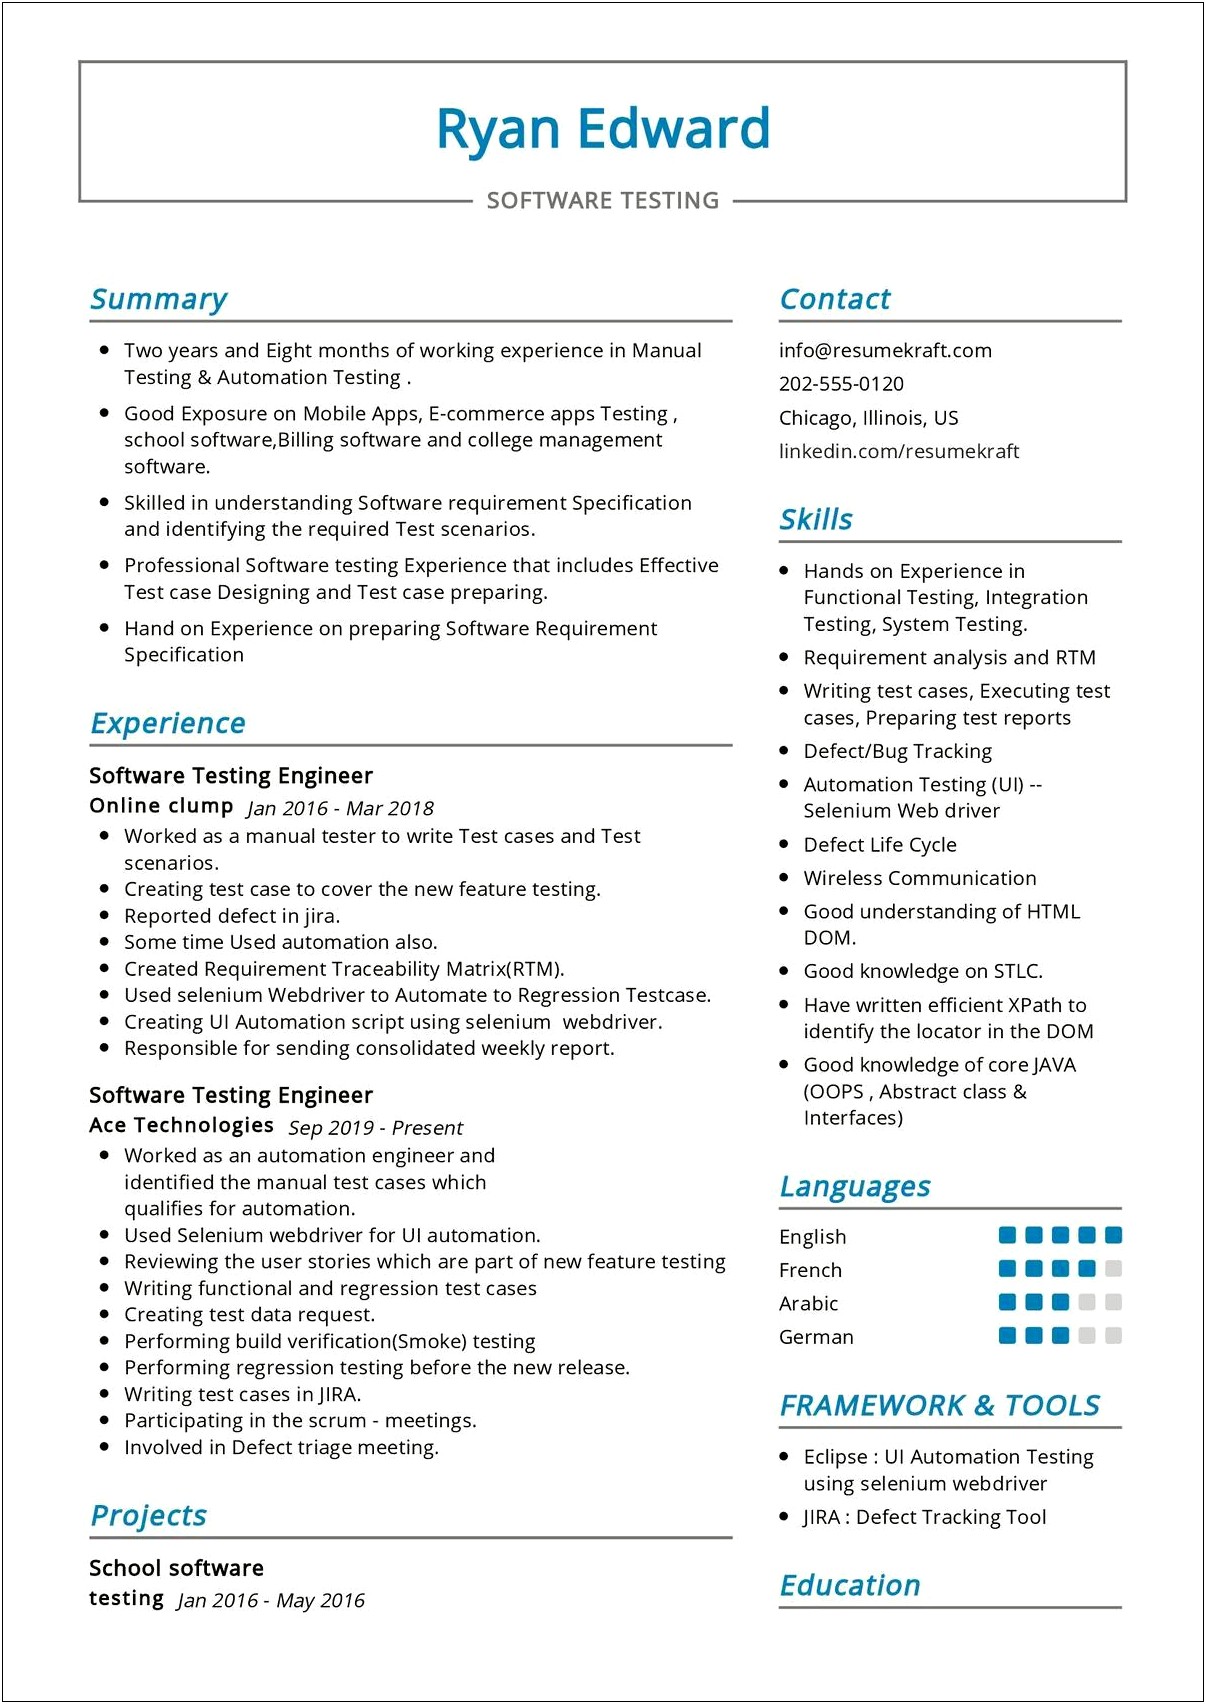 Software Testing 8 Years Experience Sample Resume